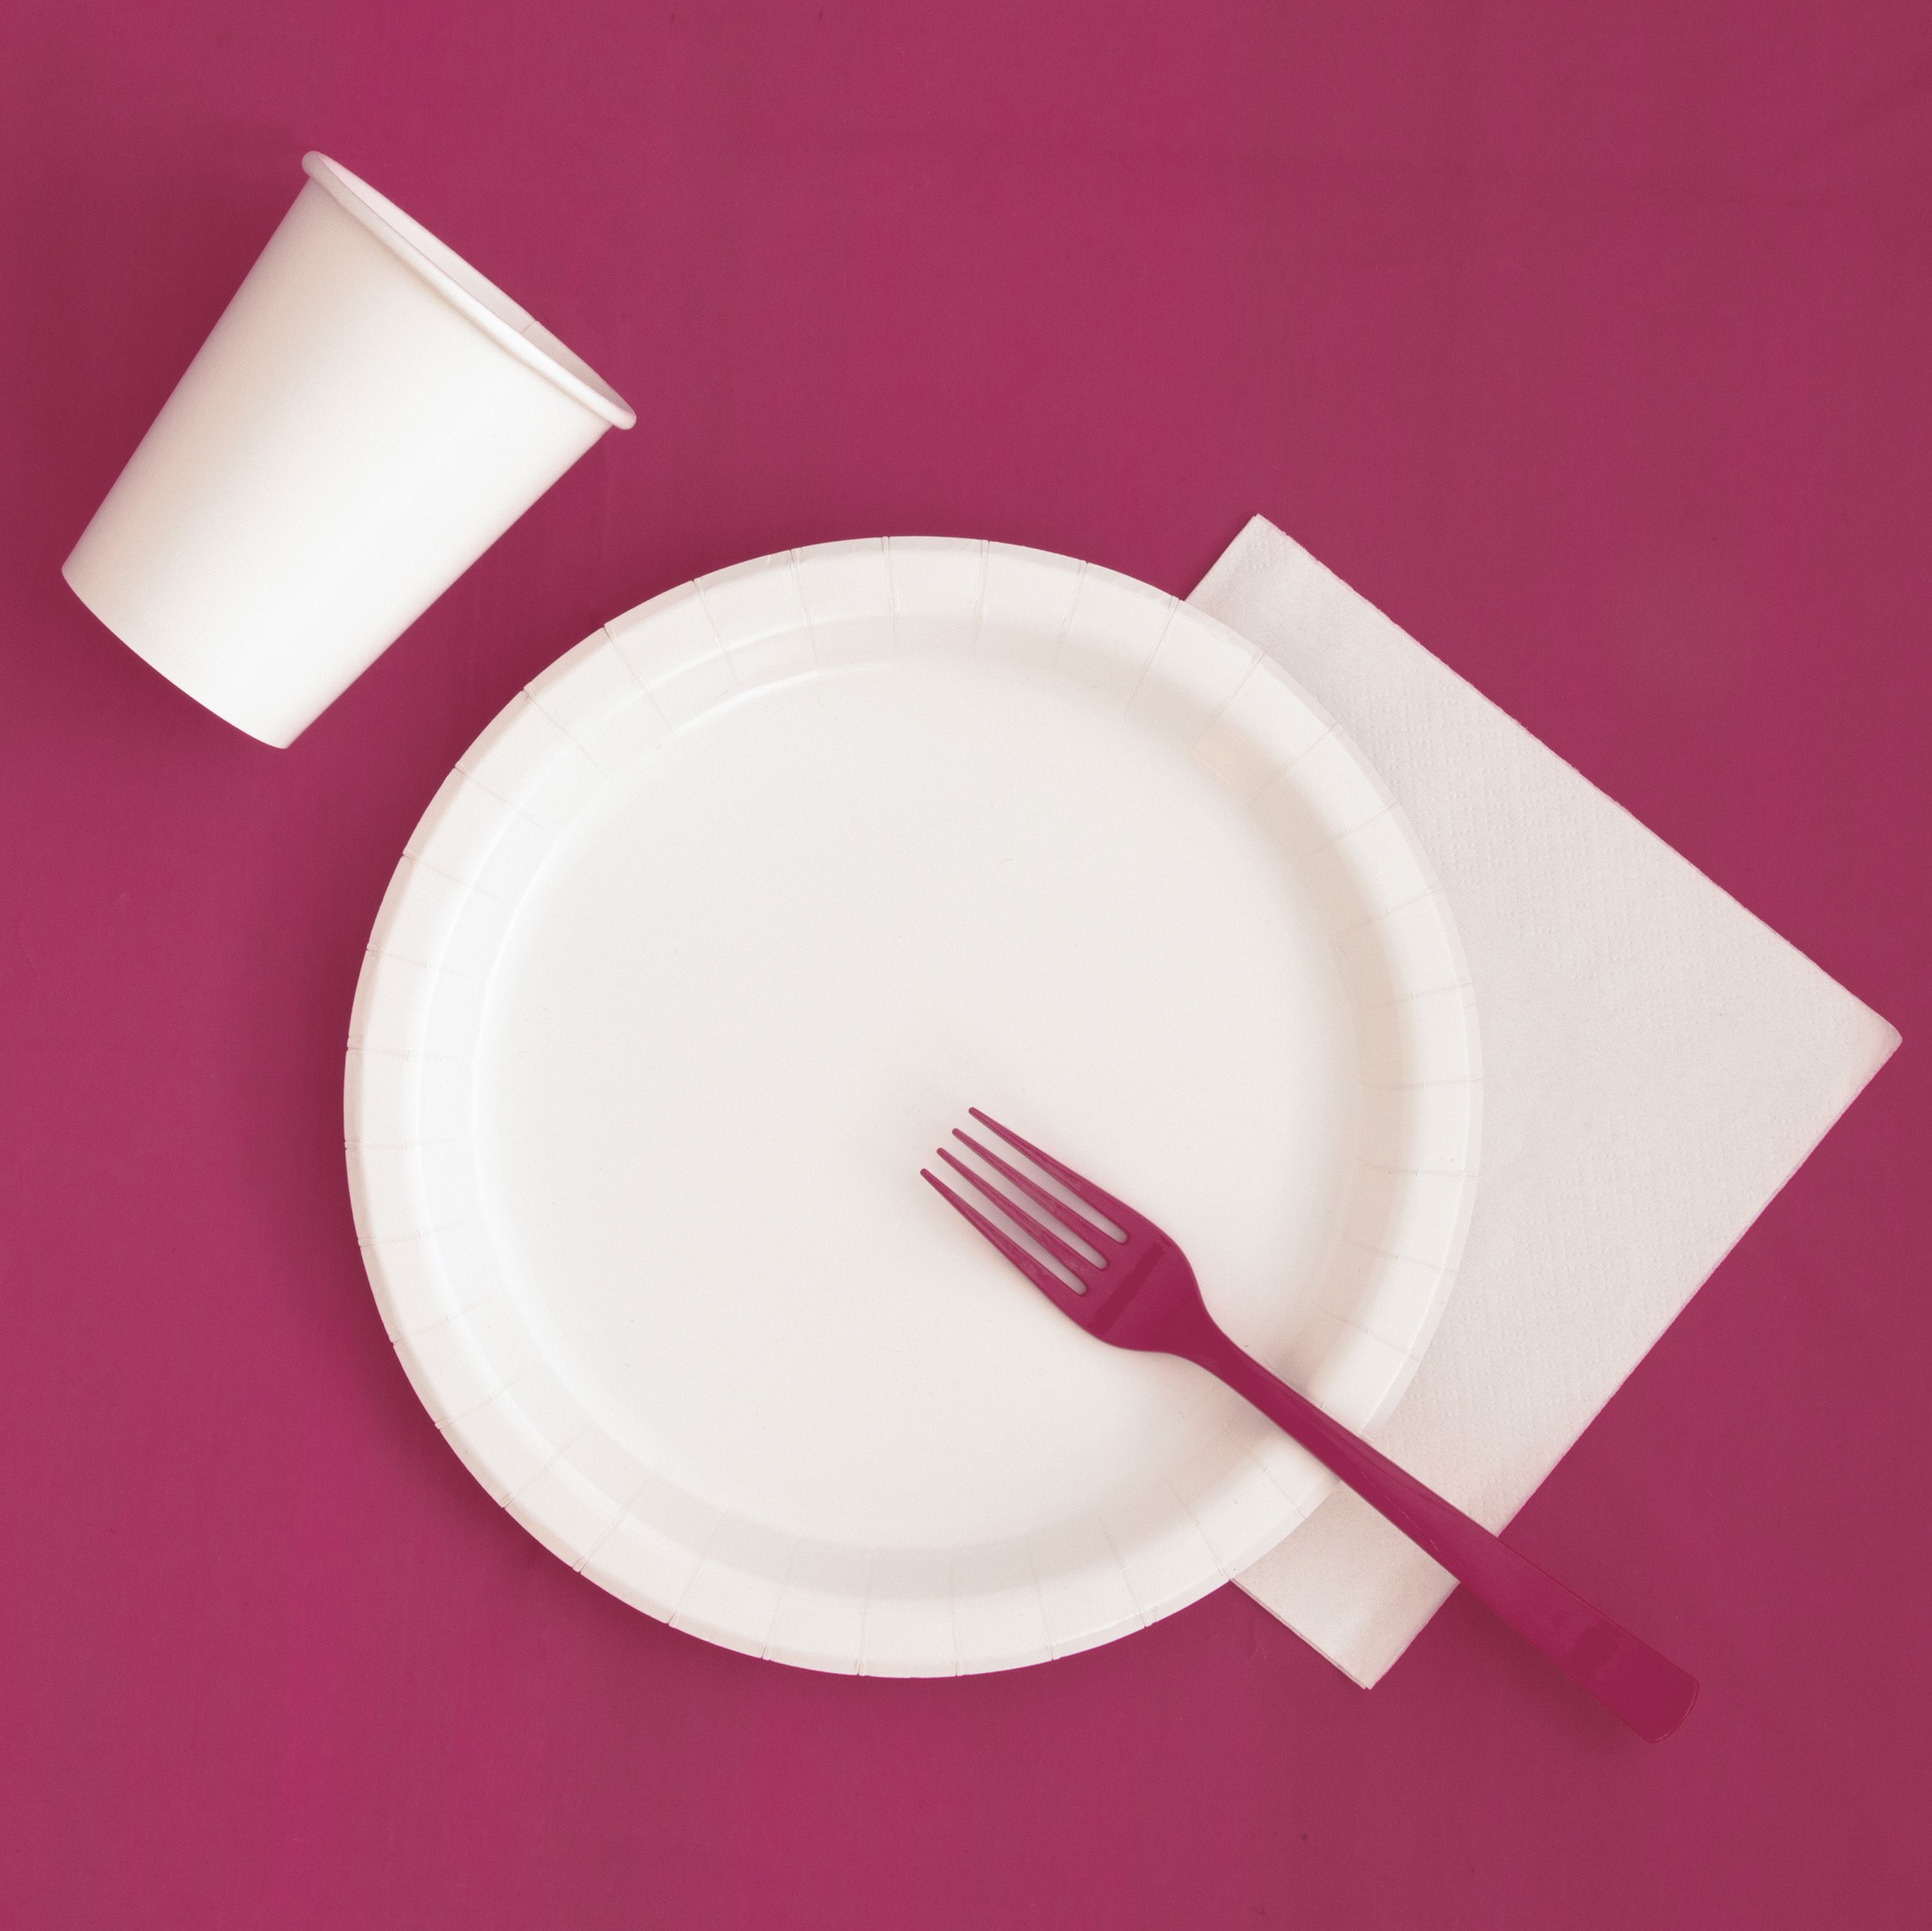 Burgundy Plastic Party Tablecloth, Round, 84in - image 3 of 3